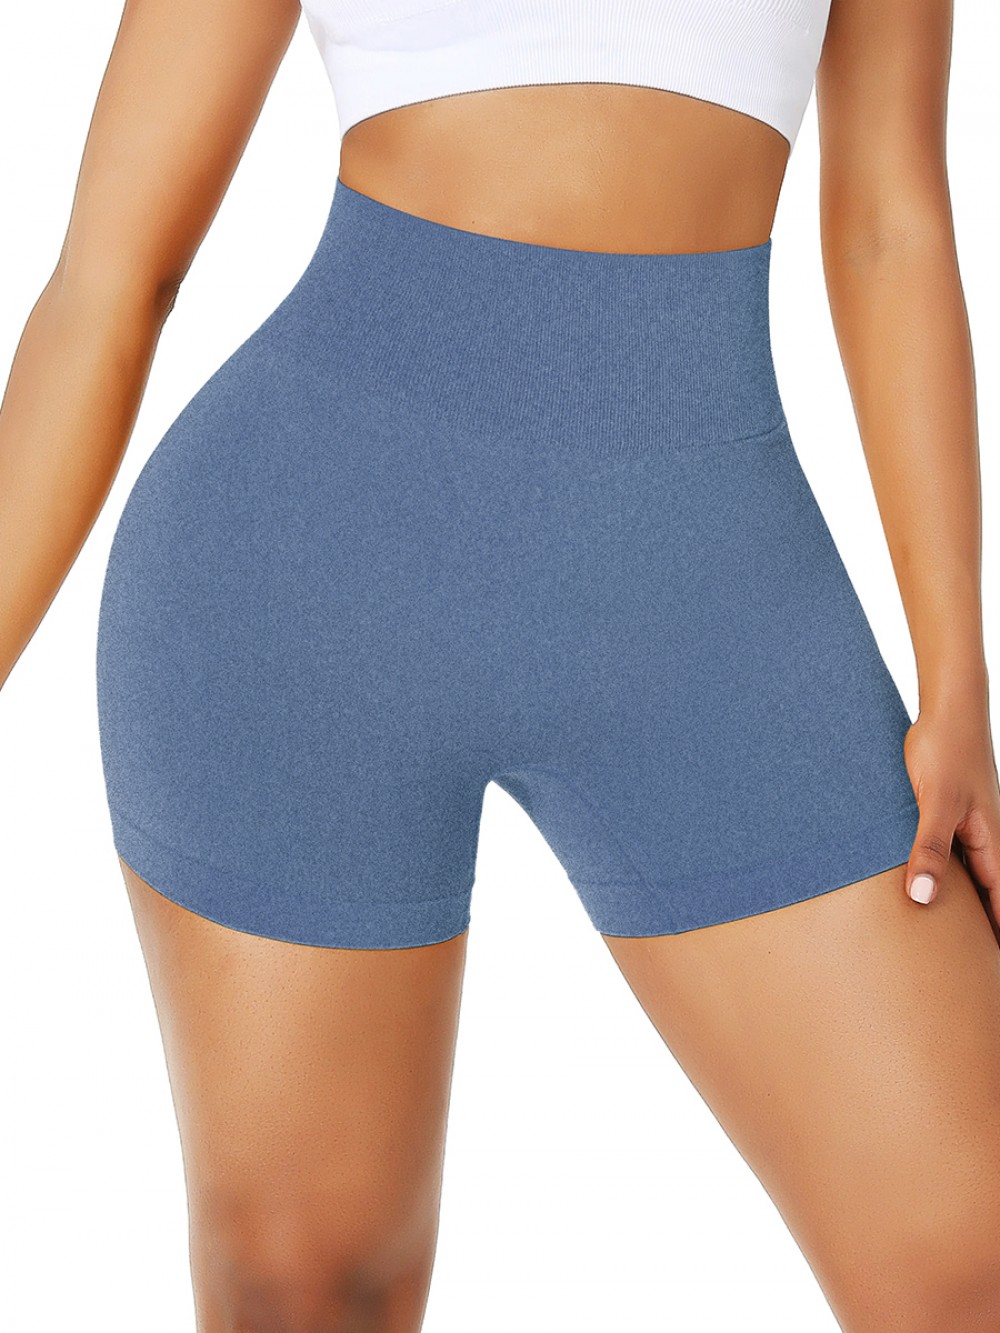 Svelte Style Blue Solid Color Sports Shorts Thigh Length For Women